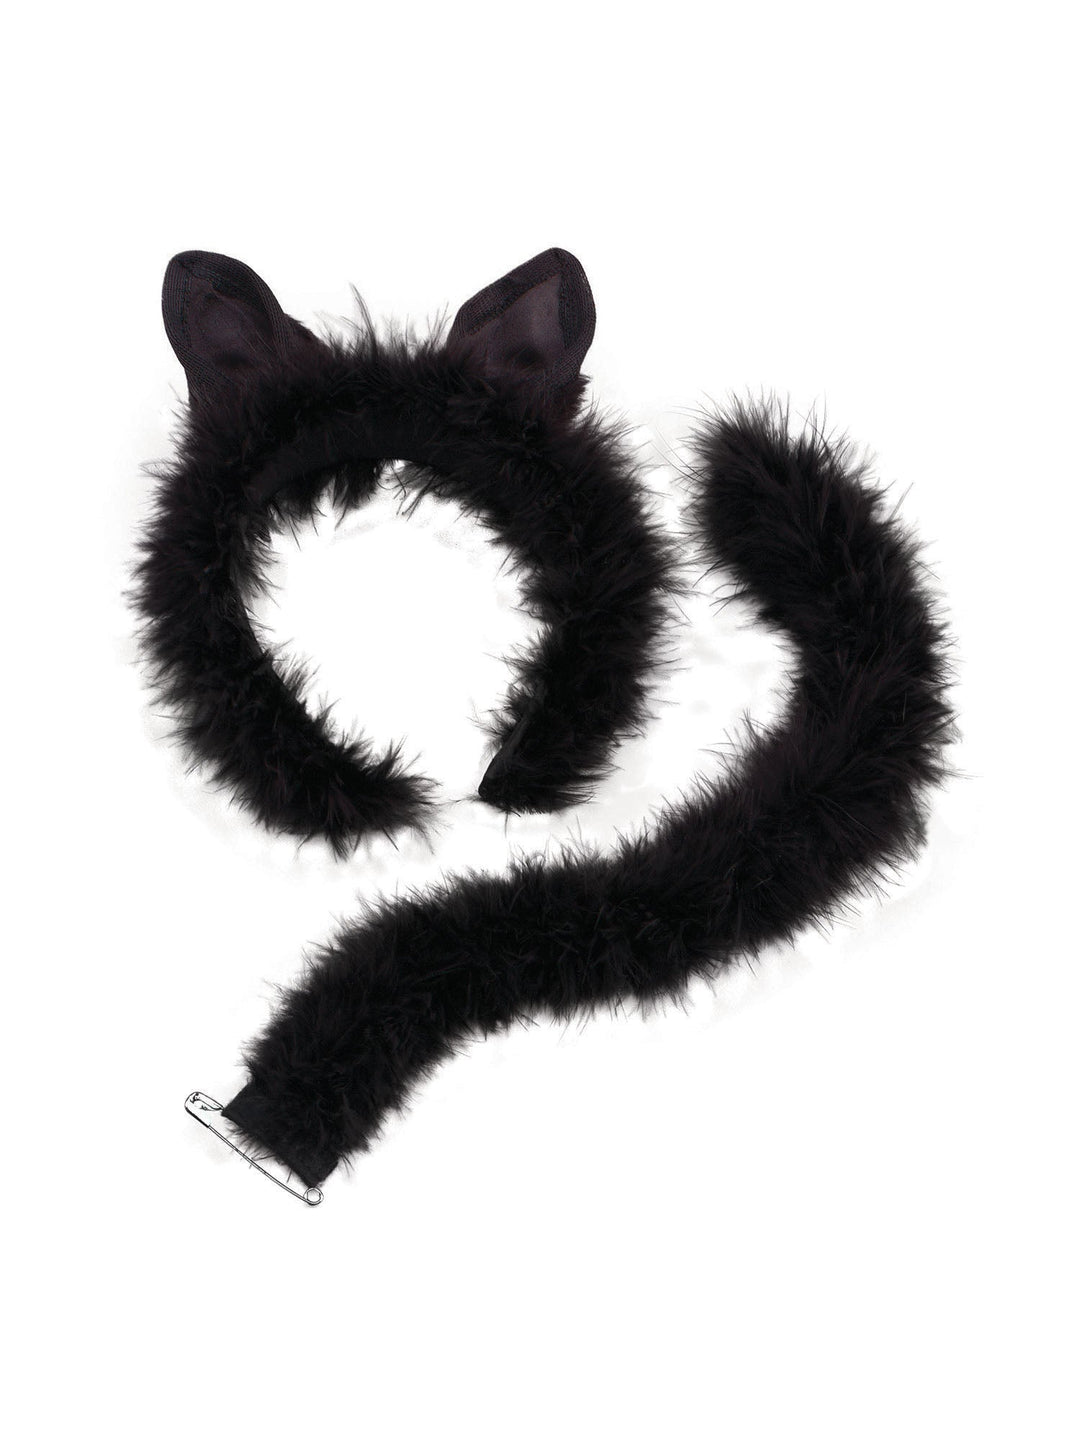 Cat Set Marabou Trim Instant Disguise Black Fluffy Ears and Tail